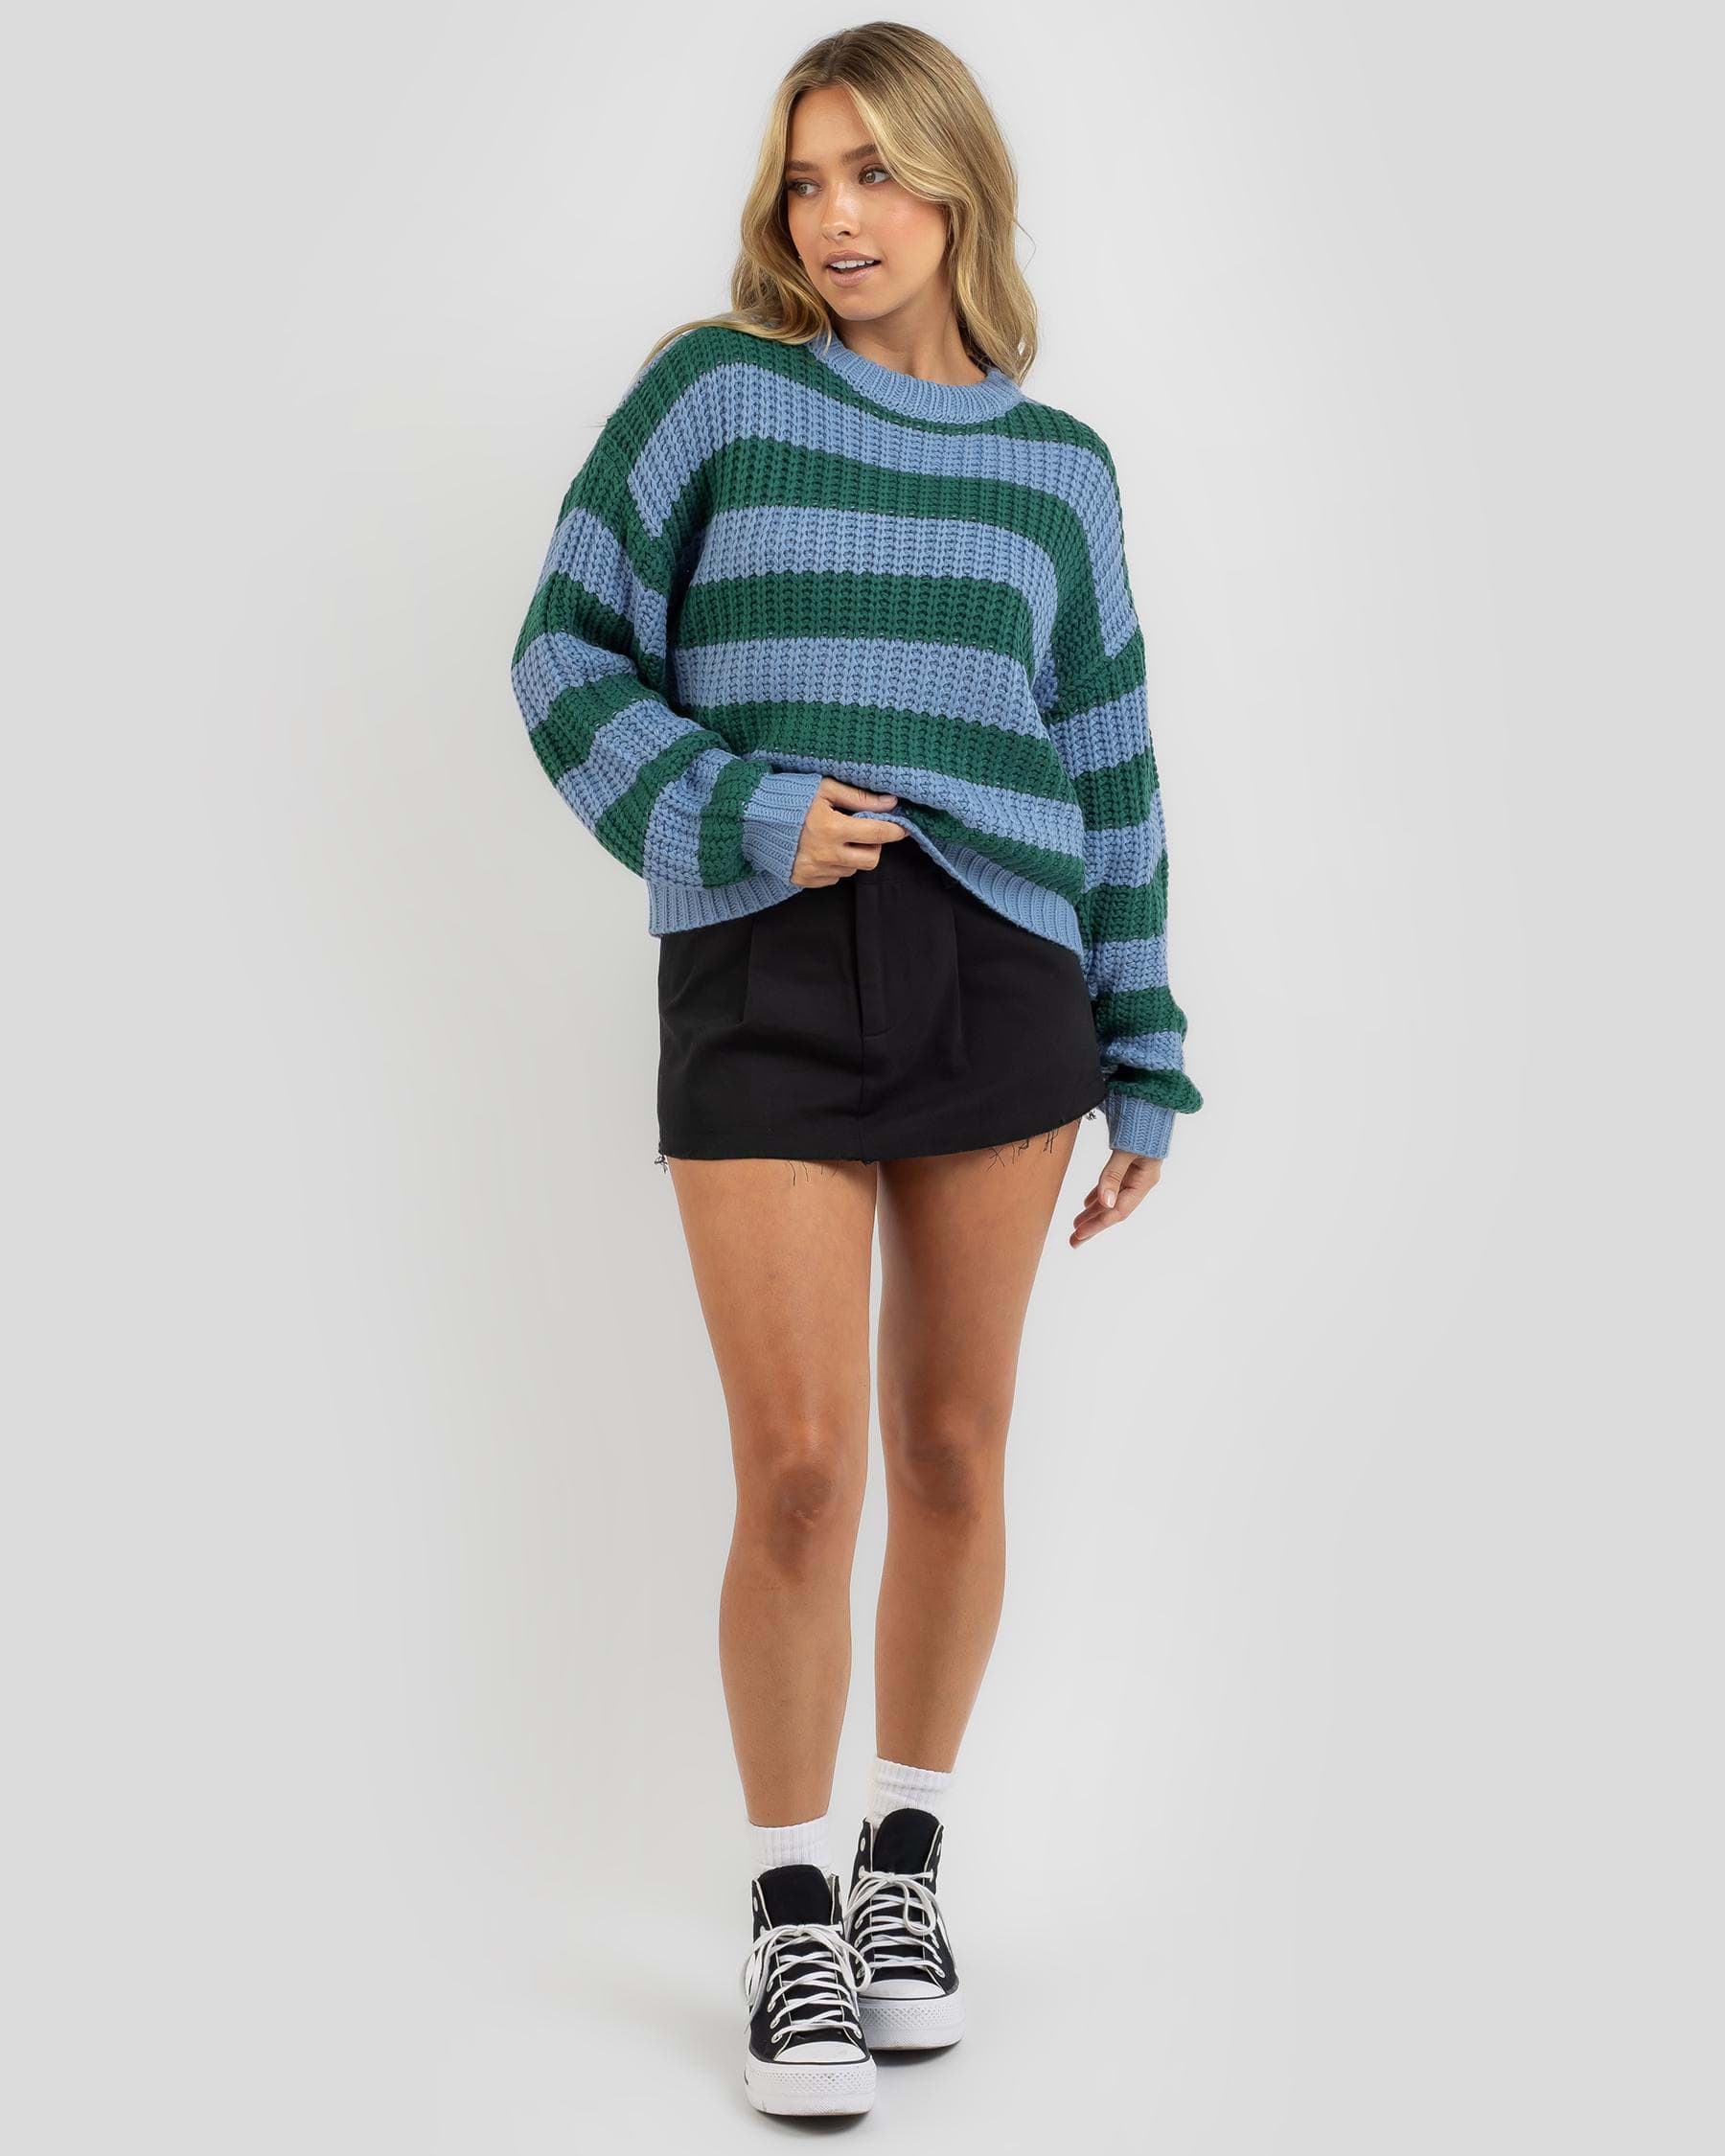 Ava And Ever Hawk Stripe Crew Neck Knit Jumper In Blue/green - Fast ...